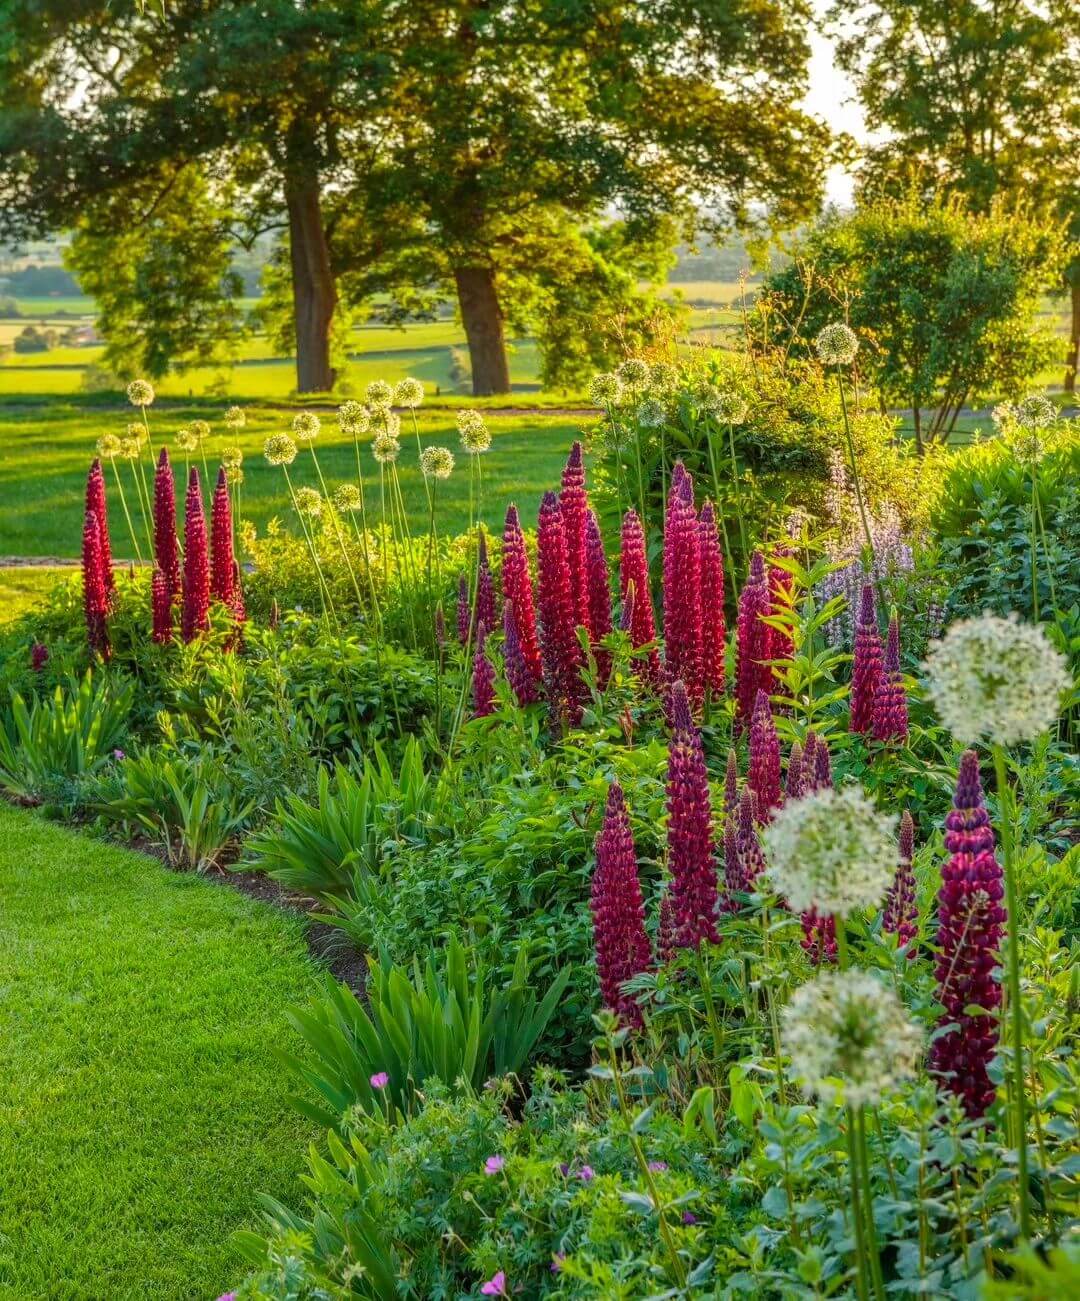 Flower landscape design is always popular, as flowers bring a colorful and fresh touch to any front yard, backyard, or garden alike. Some people prefer the all-year greens and cacti, but flowers are always a classic when you want your home to feel more welcoming for you and those who visit you.